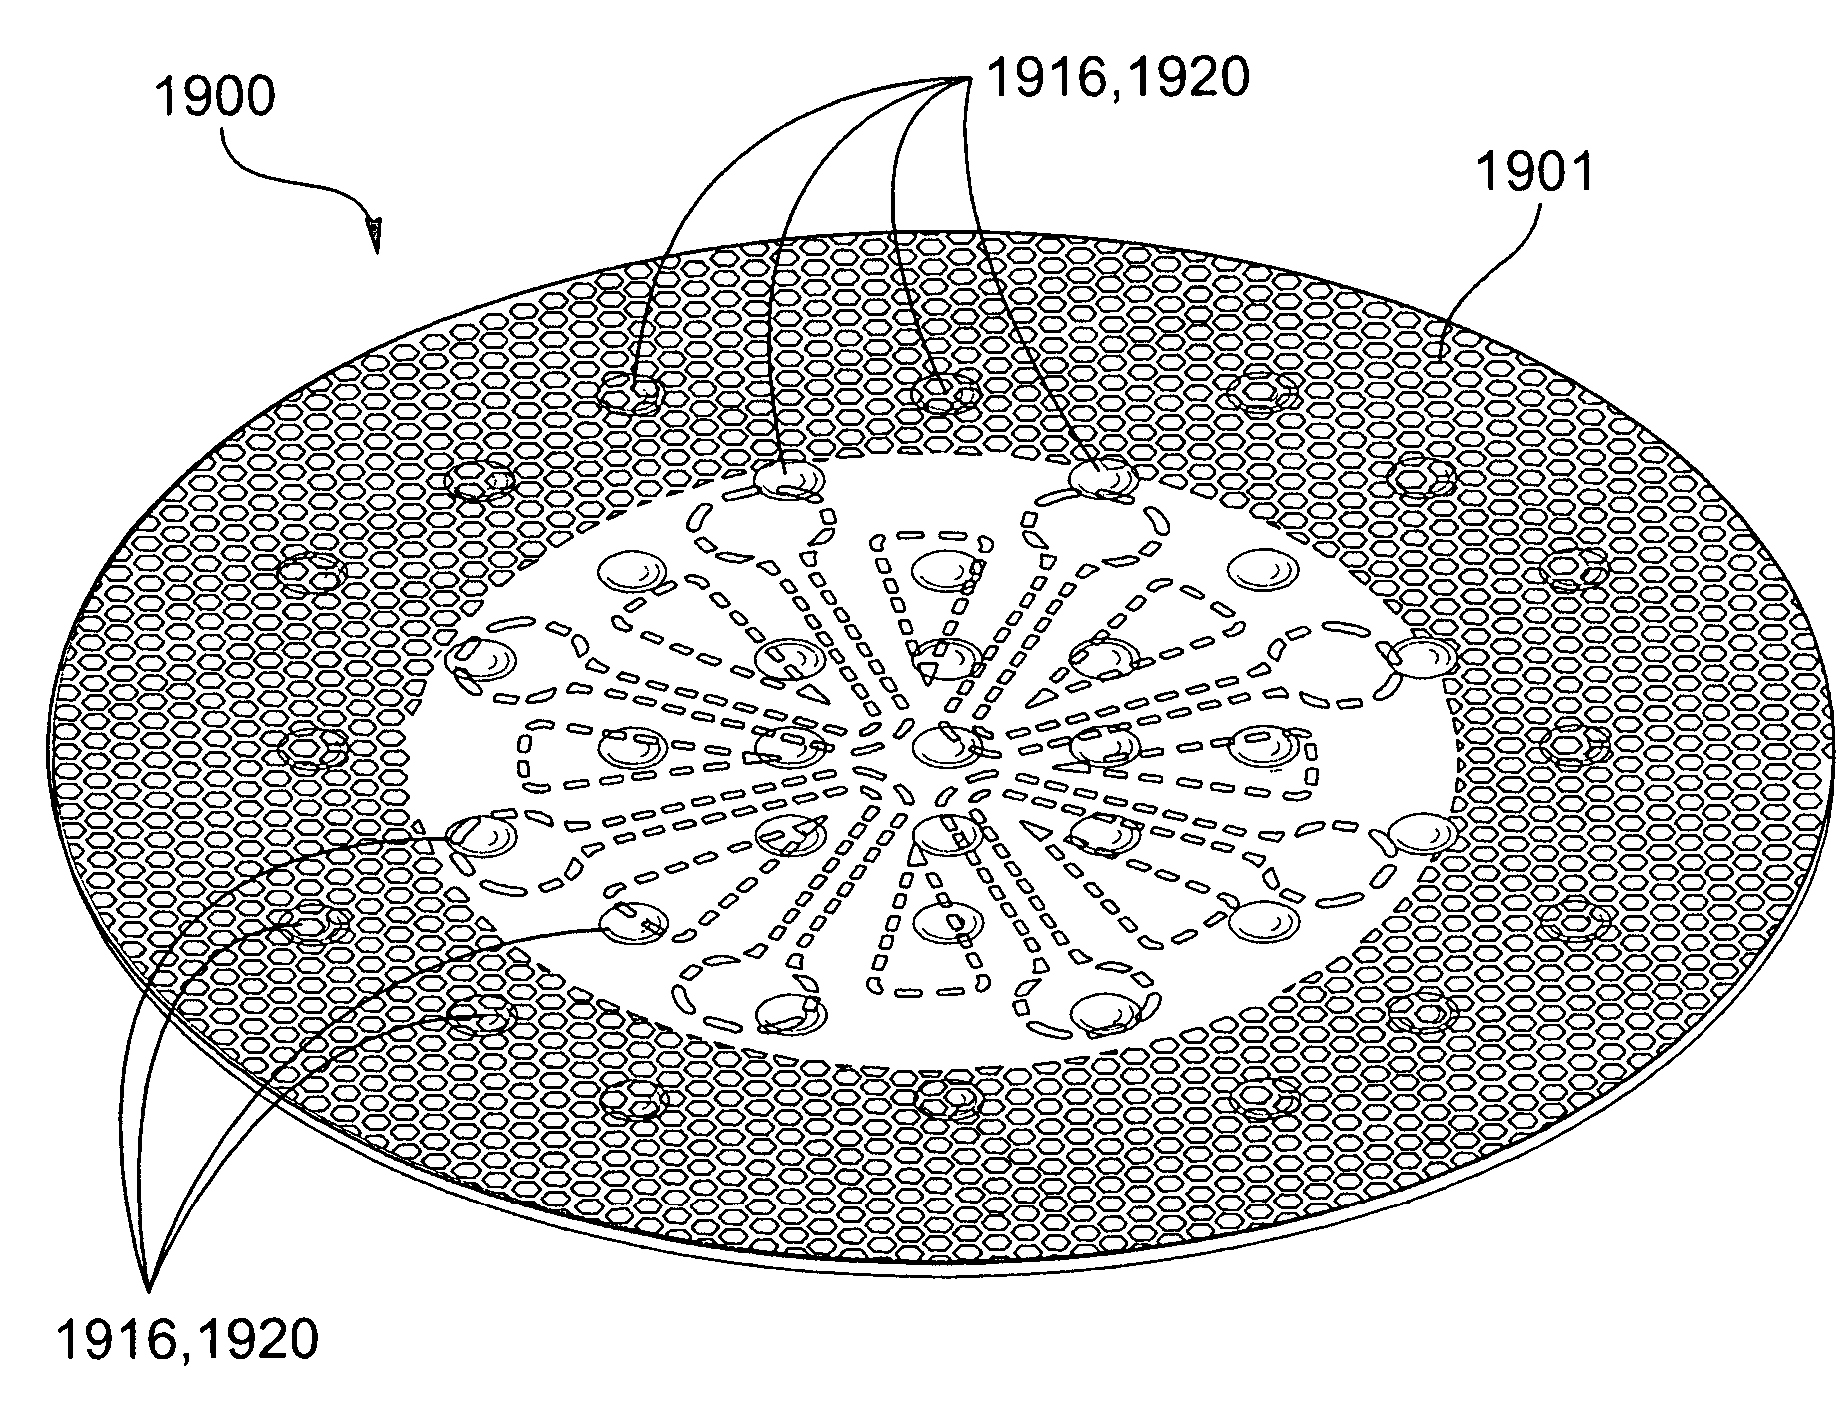 Microwave packaging with indentation patterns